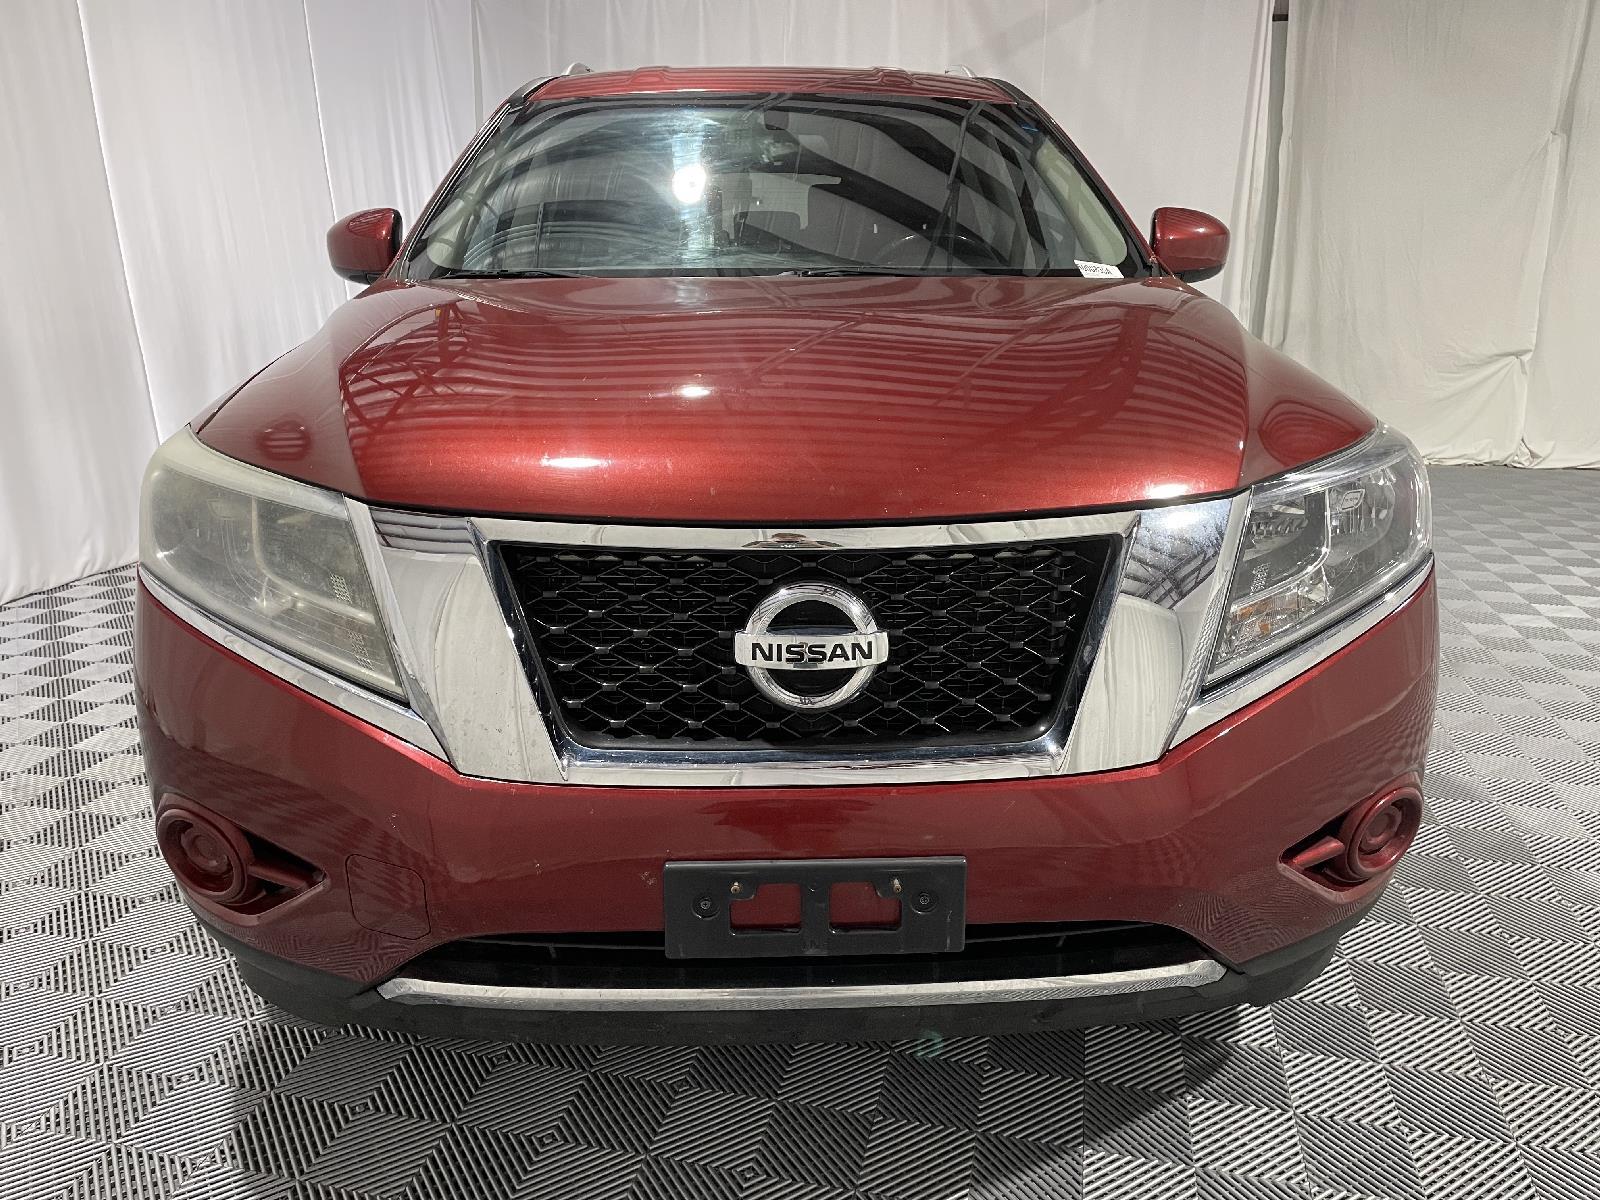 Used 2013 Nissan Pathfinder SV with VIN 5N1AR2MM2DC641783 for sale in Saint Joseph, MO